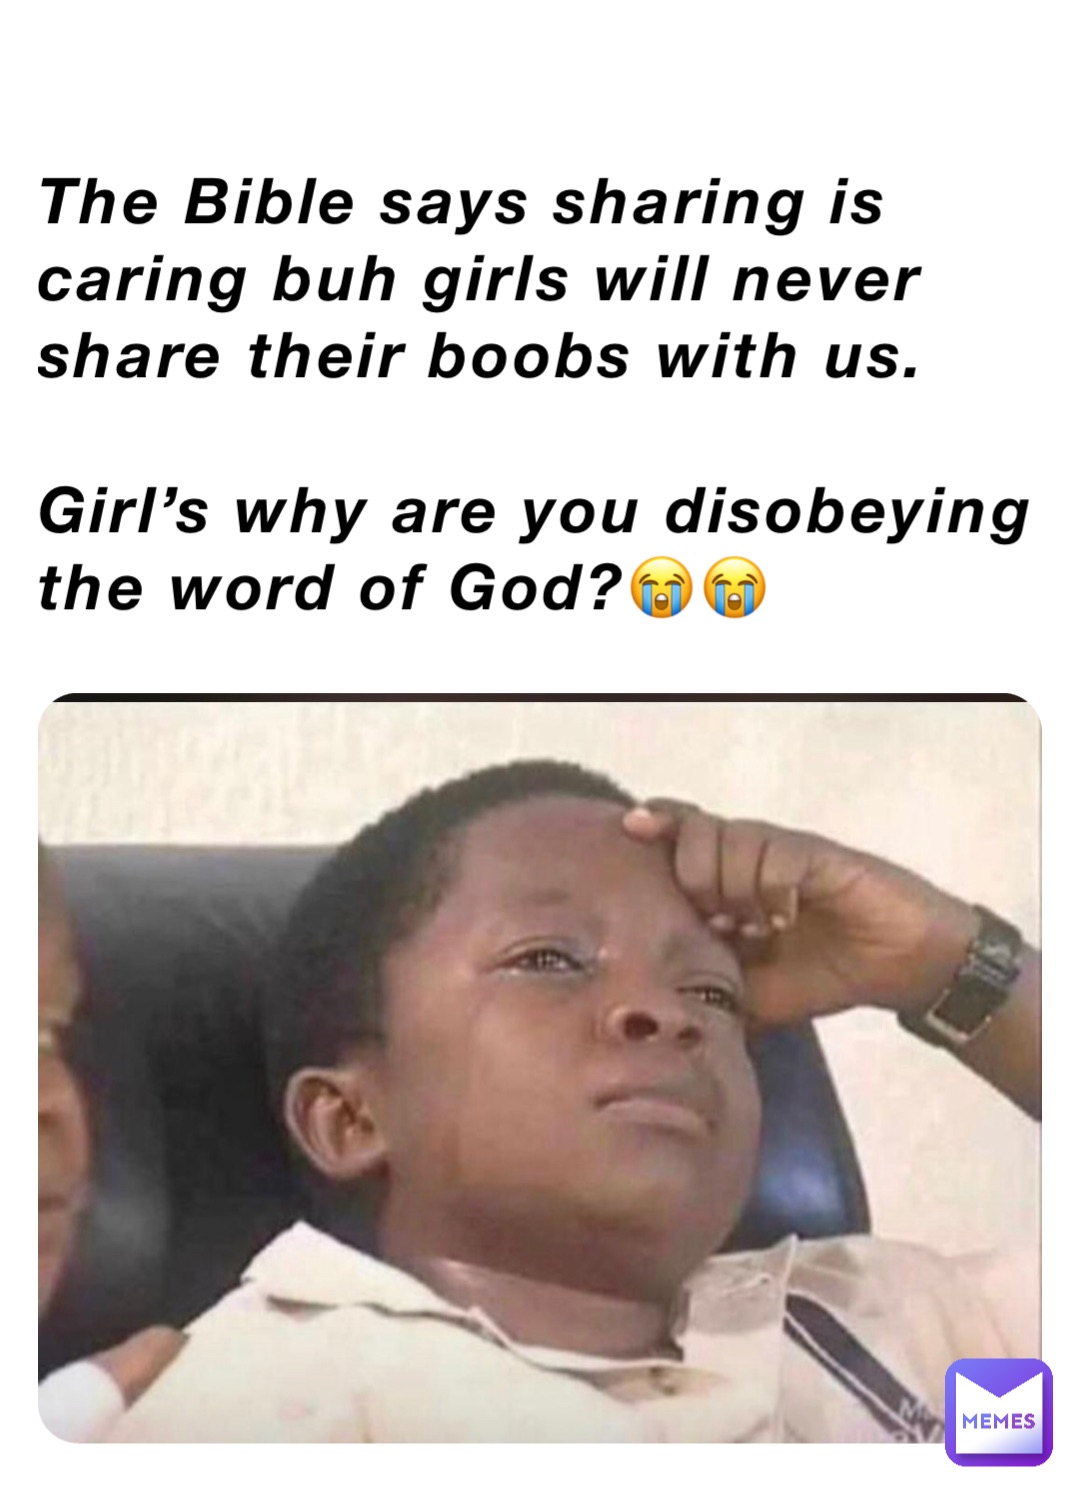 The Bible says sharing is caring buh girls will never share their boobs with us.

Girl’s why are you disobeying the word of God?😭😭